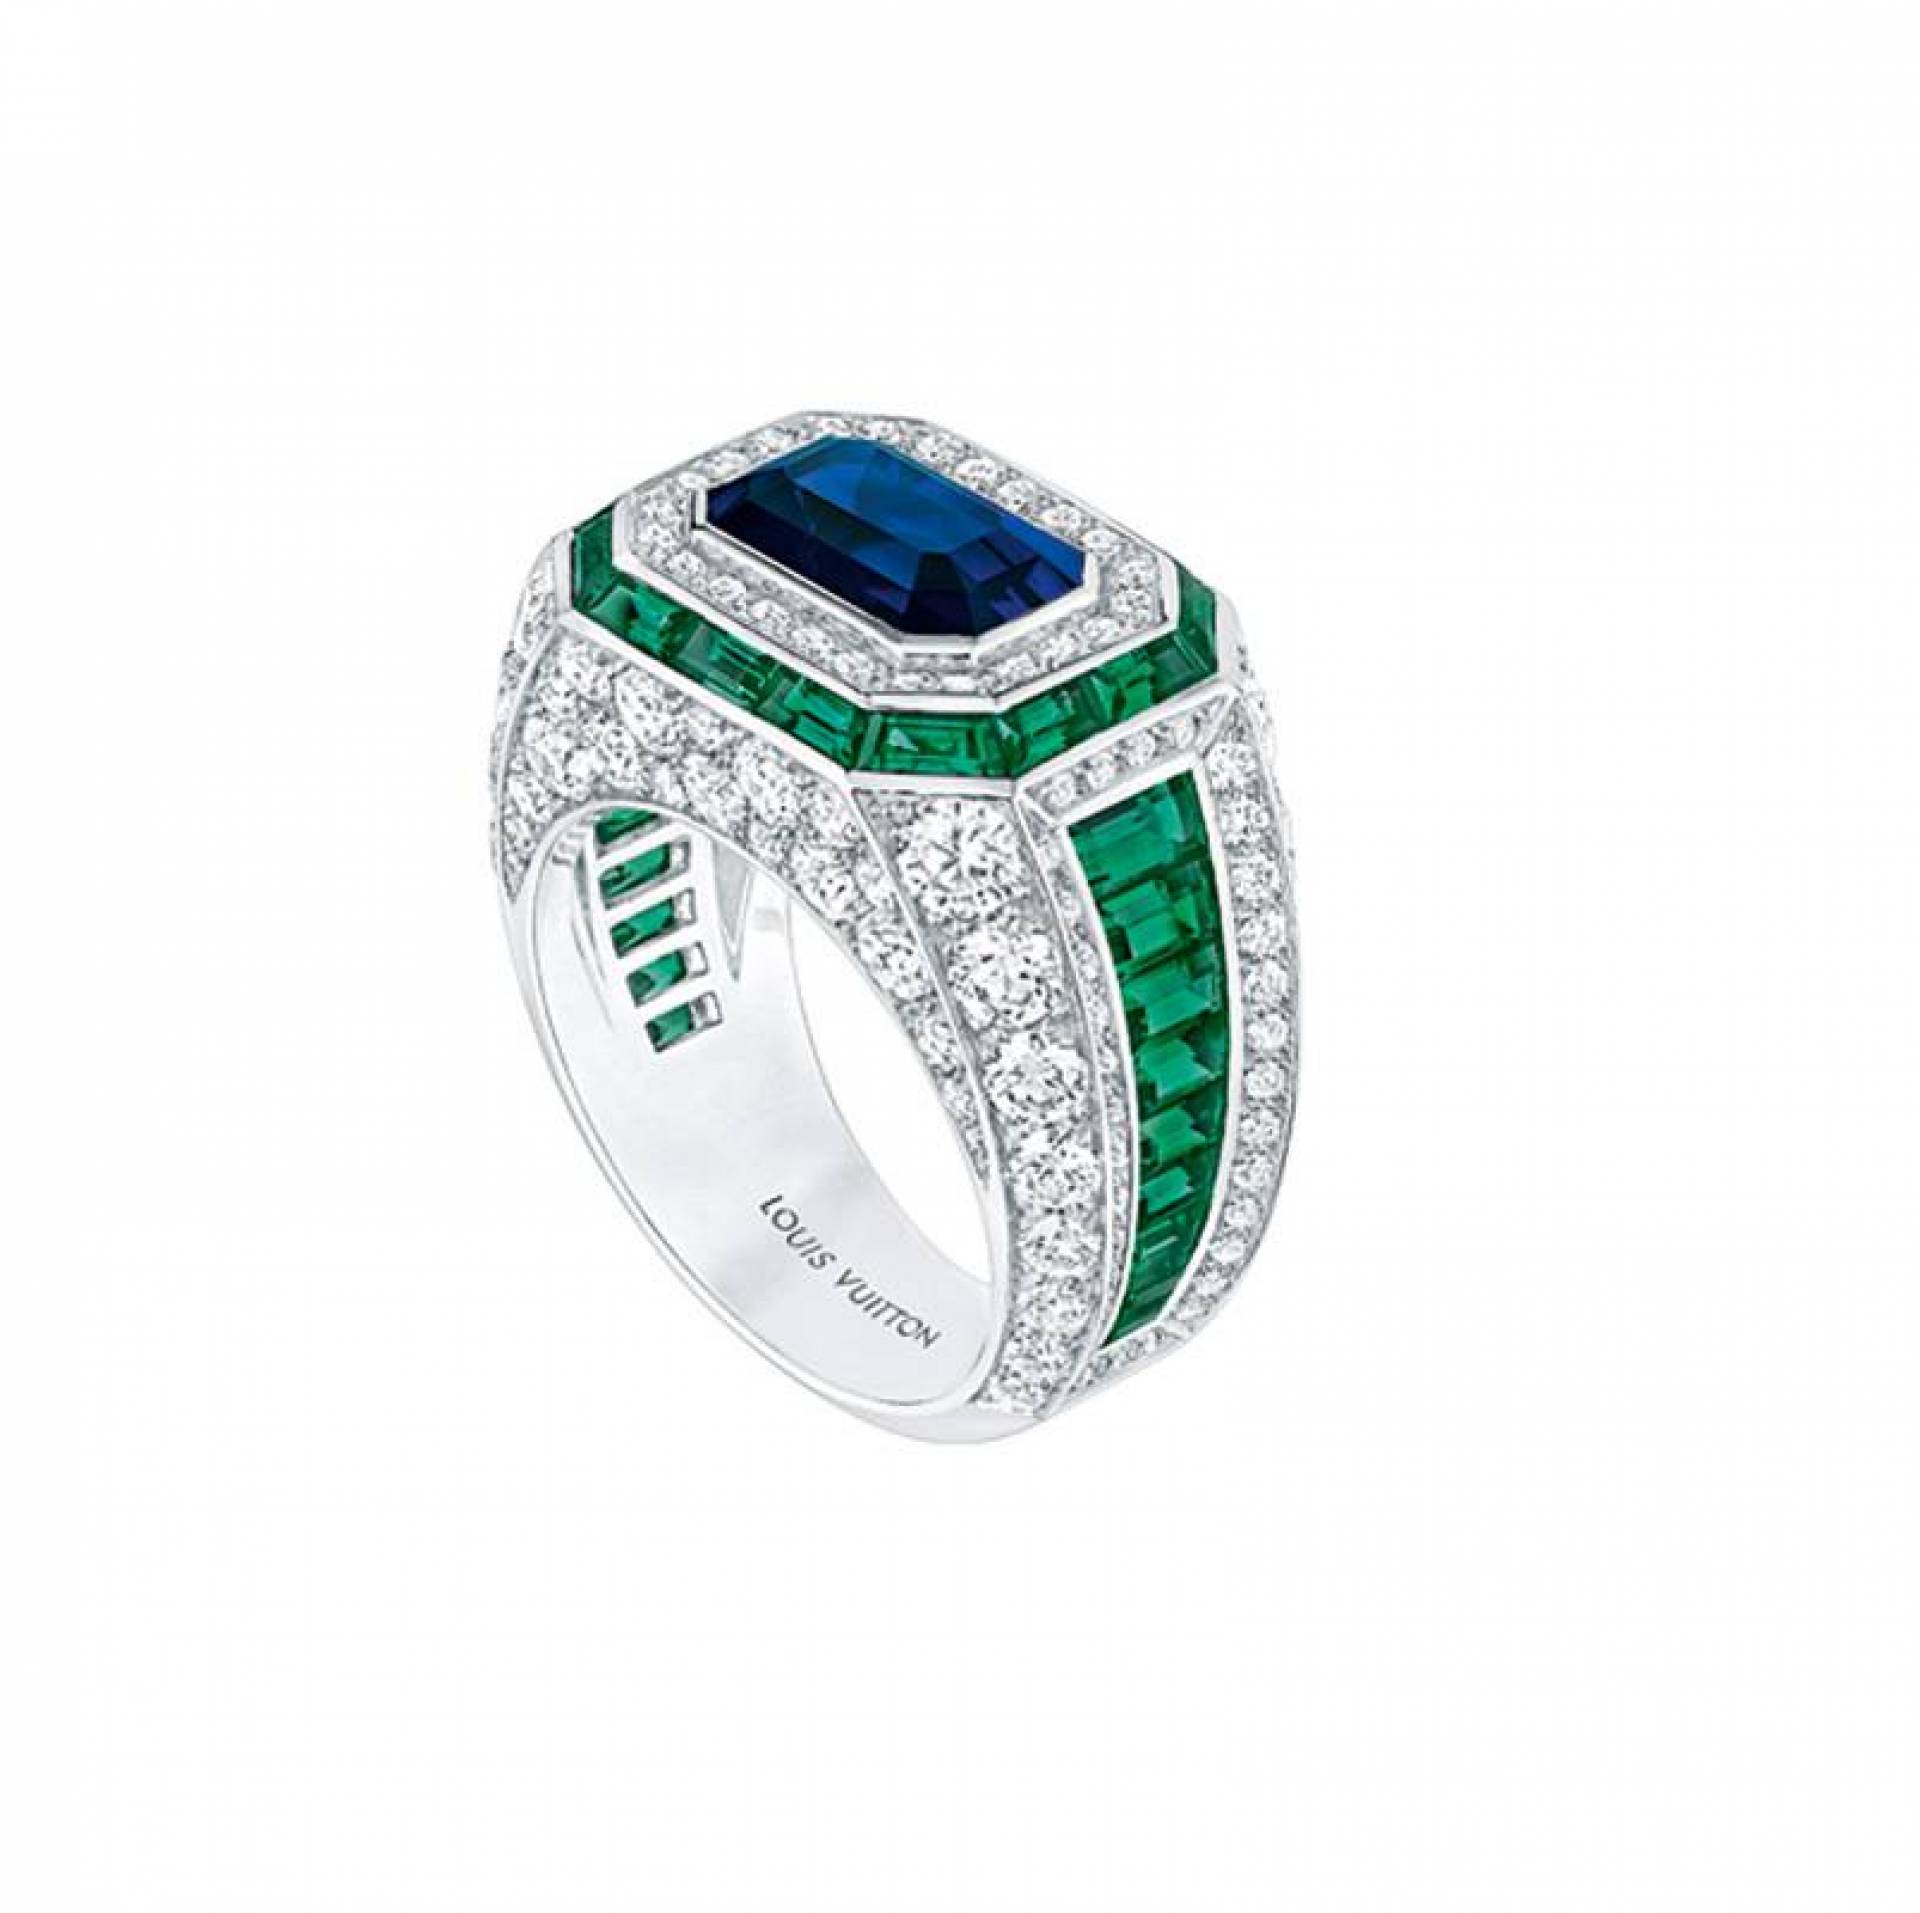 Louis Vuitton Riders of the Knights Le Royaume diamond and emerald